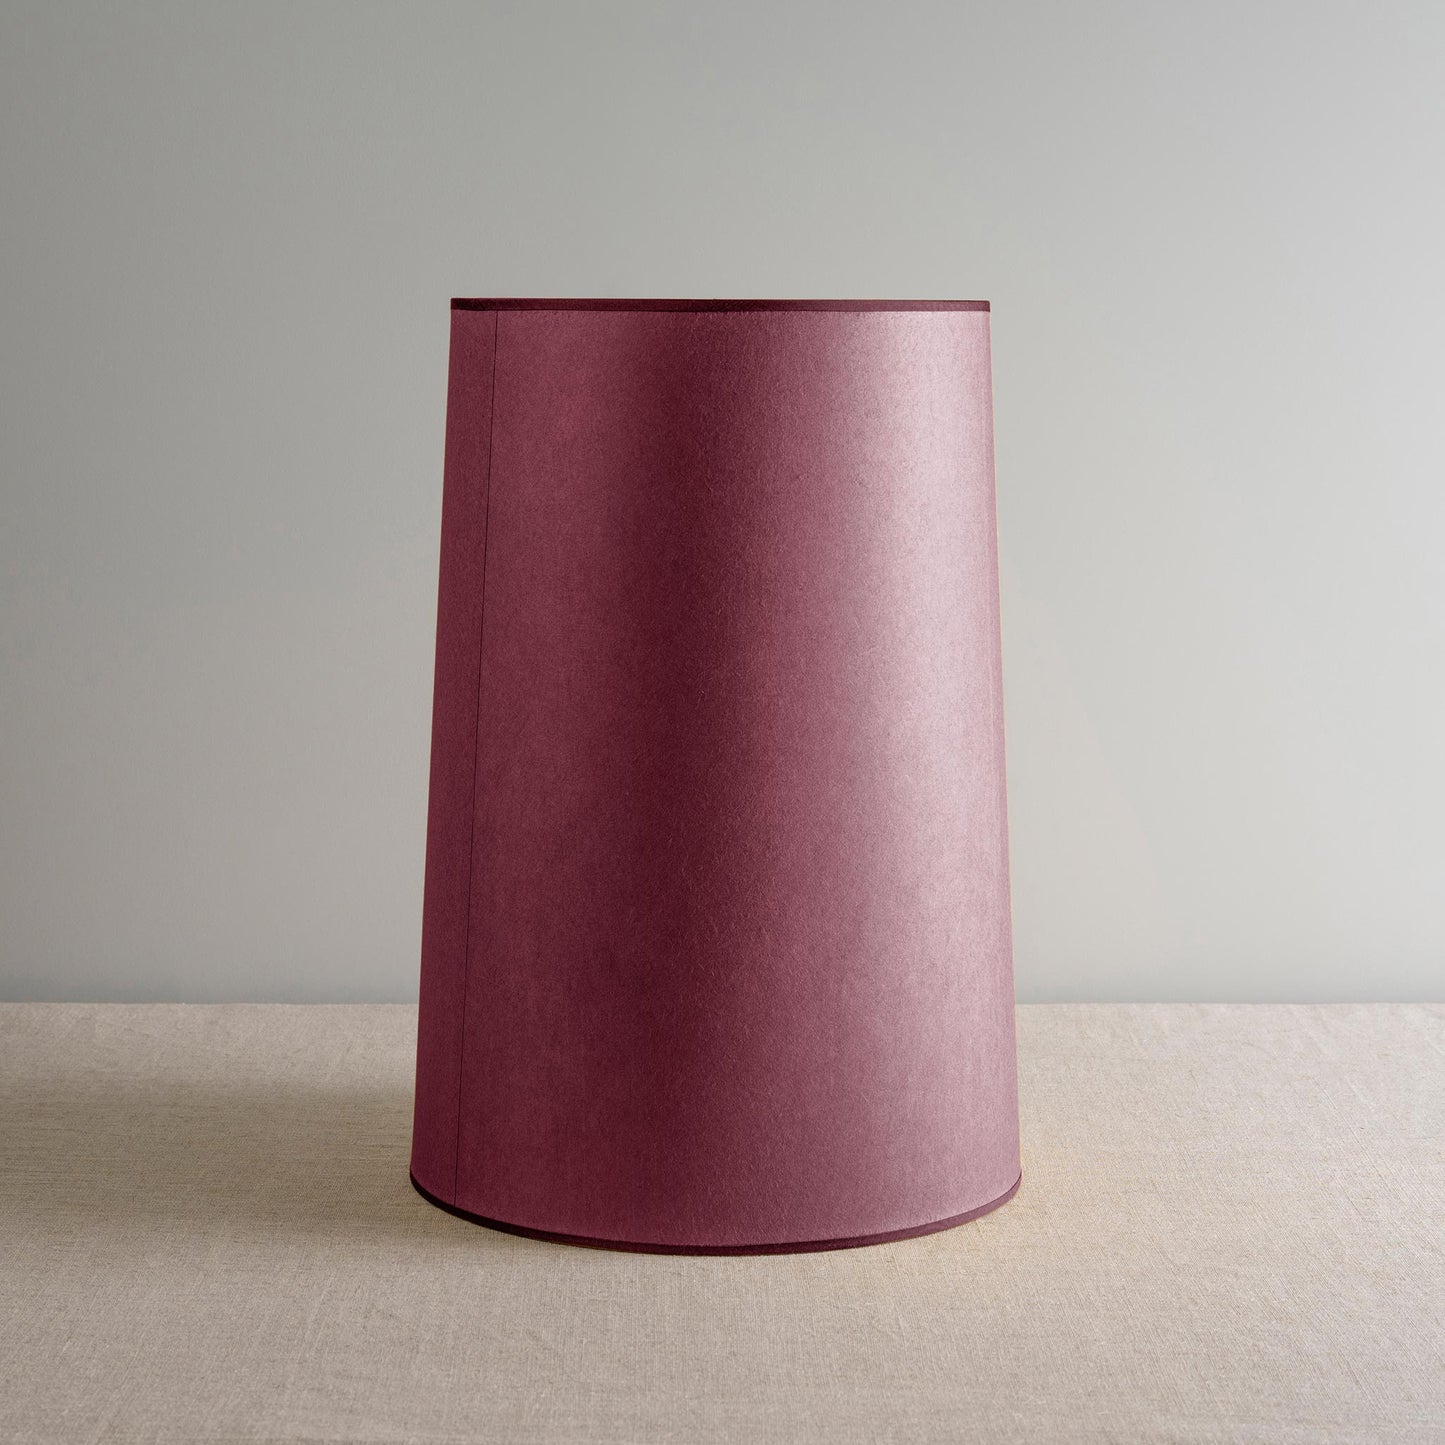 Whimsical Tall Straight Empire Lamp Shade in Burgundy